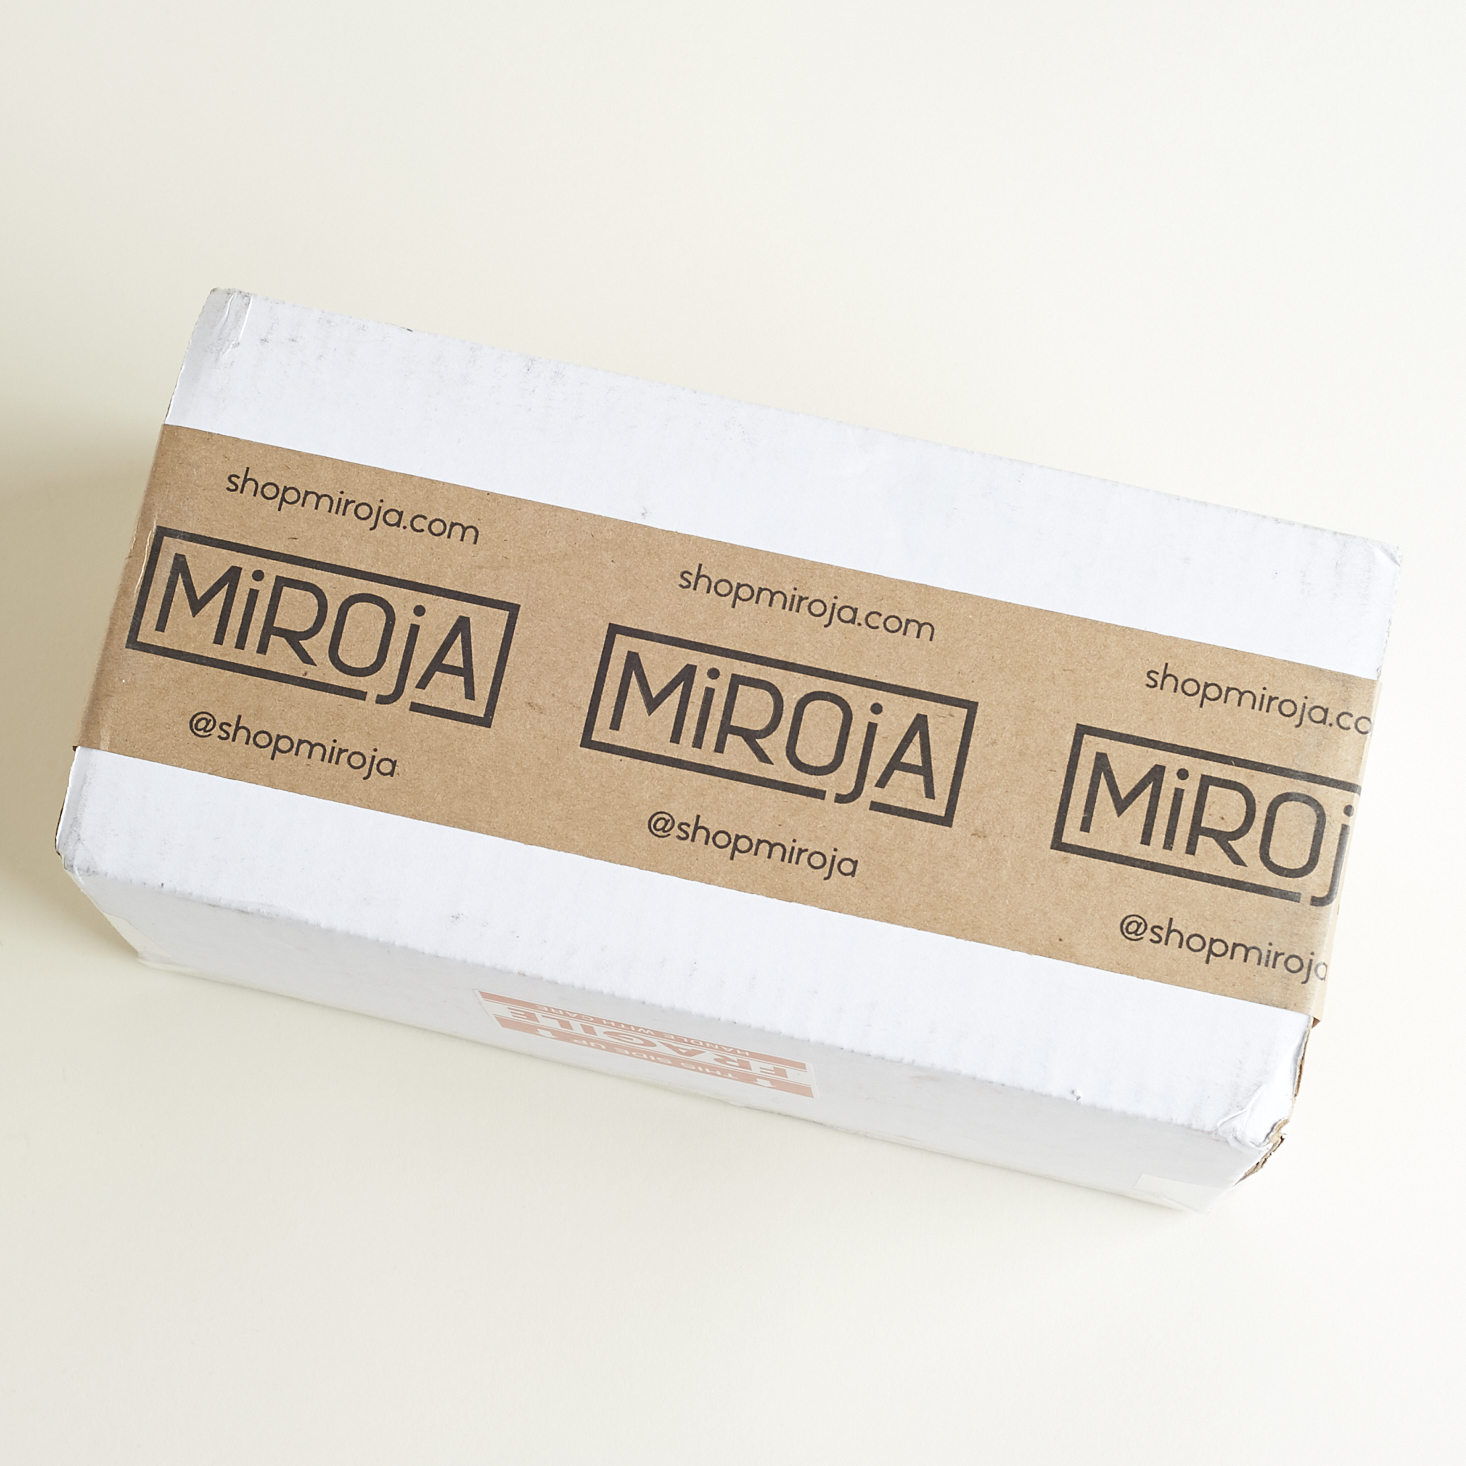 Miroja Small Surprise Gift Box Review – April 2017